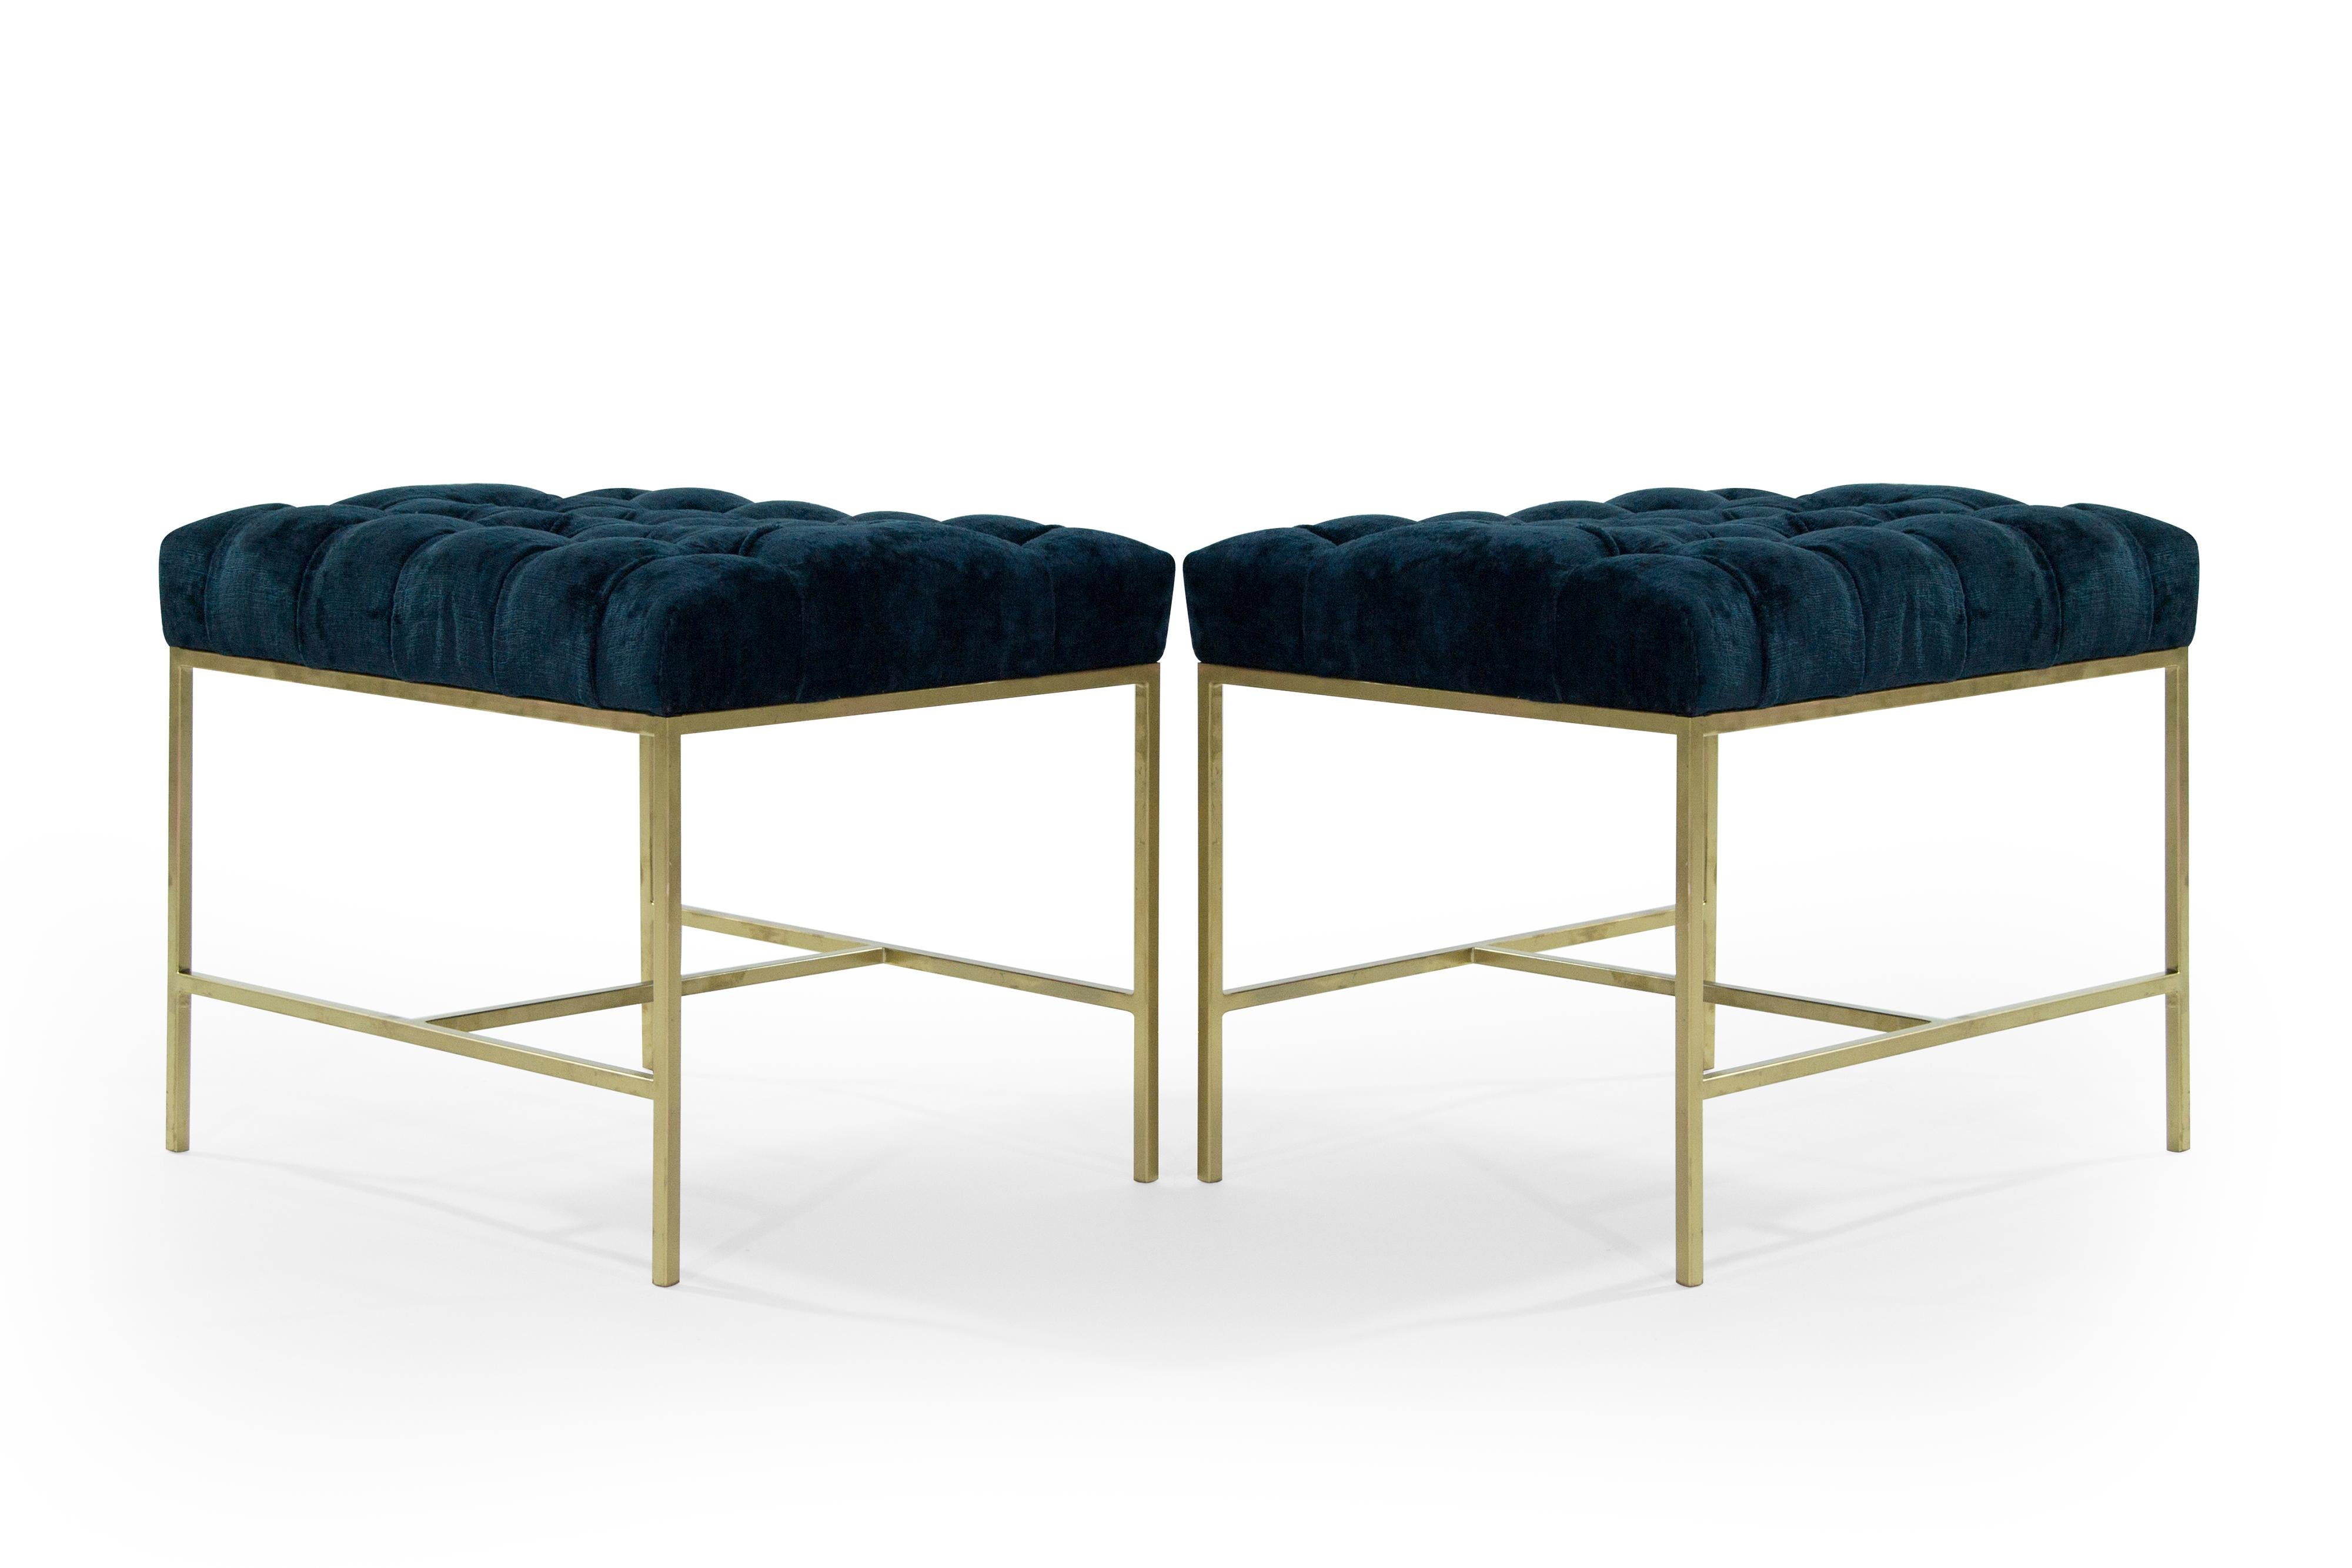 American Tufted McCobb Style Brushed Brass Stools, 1950s